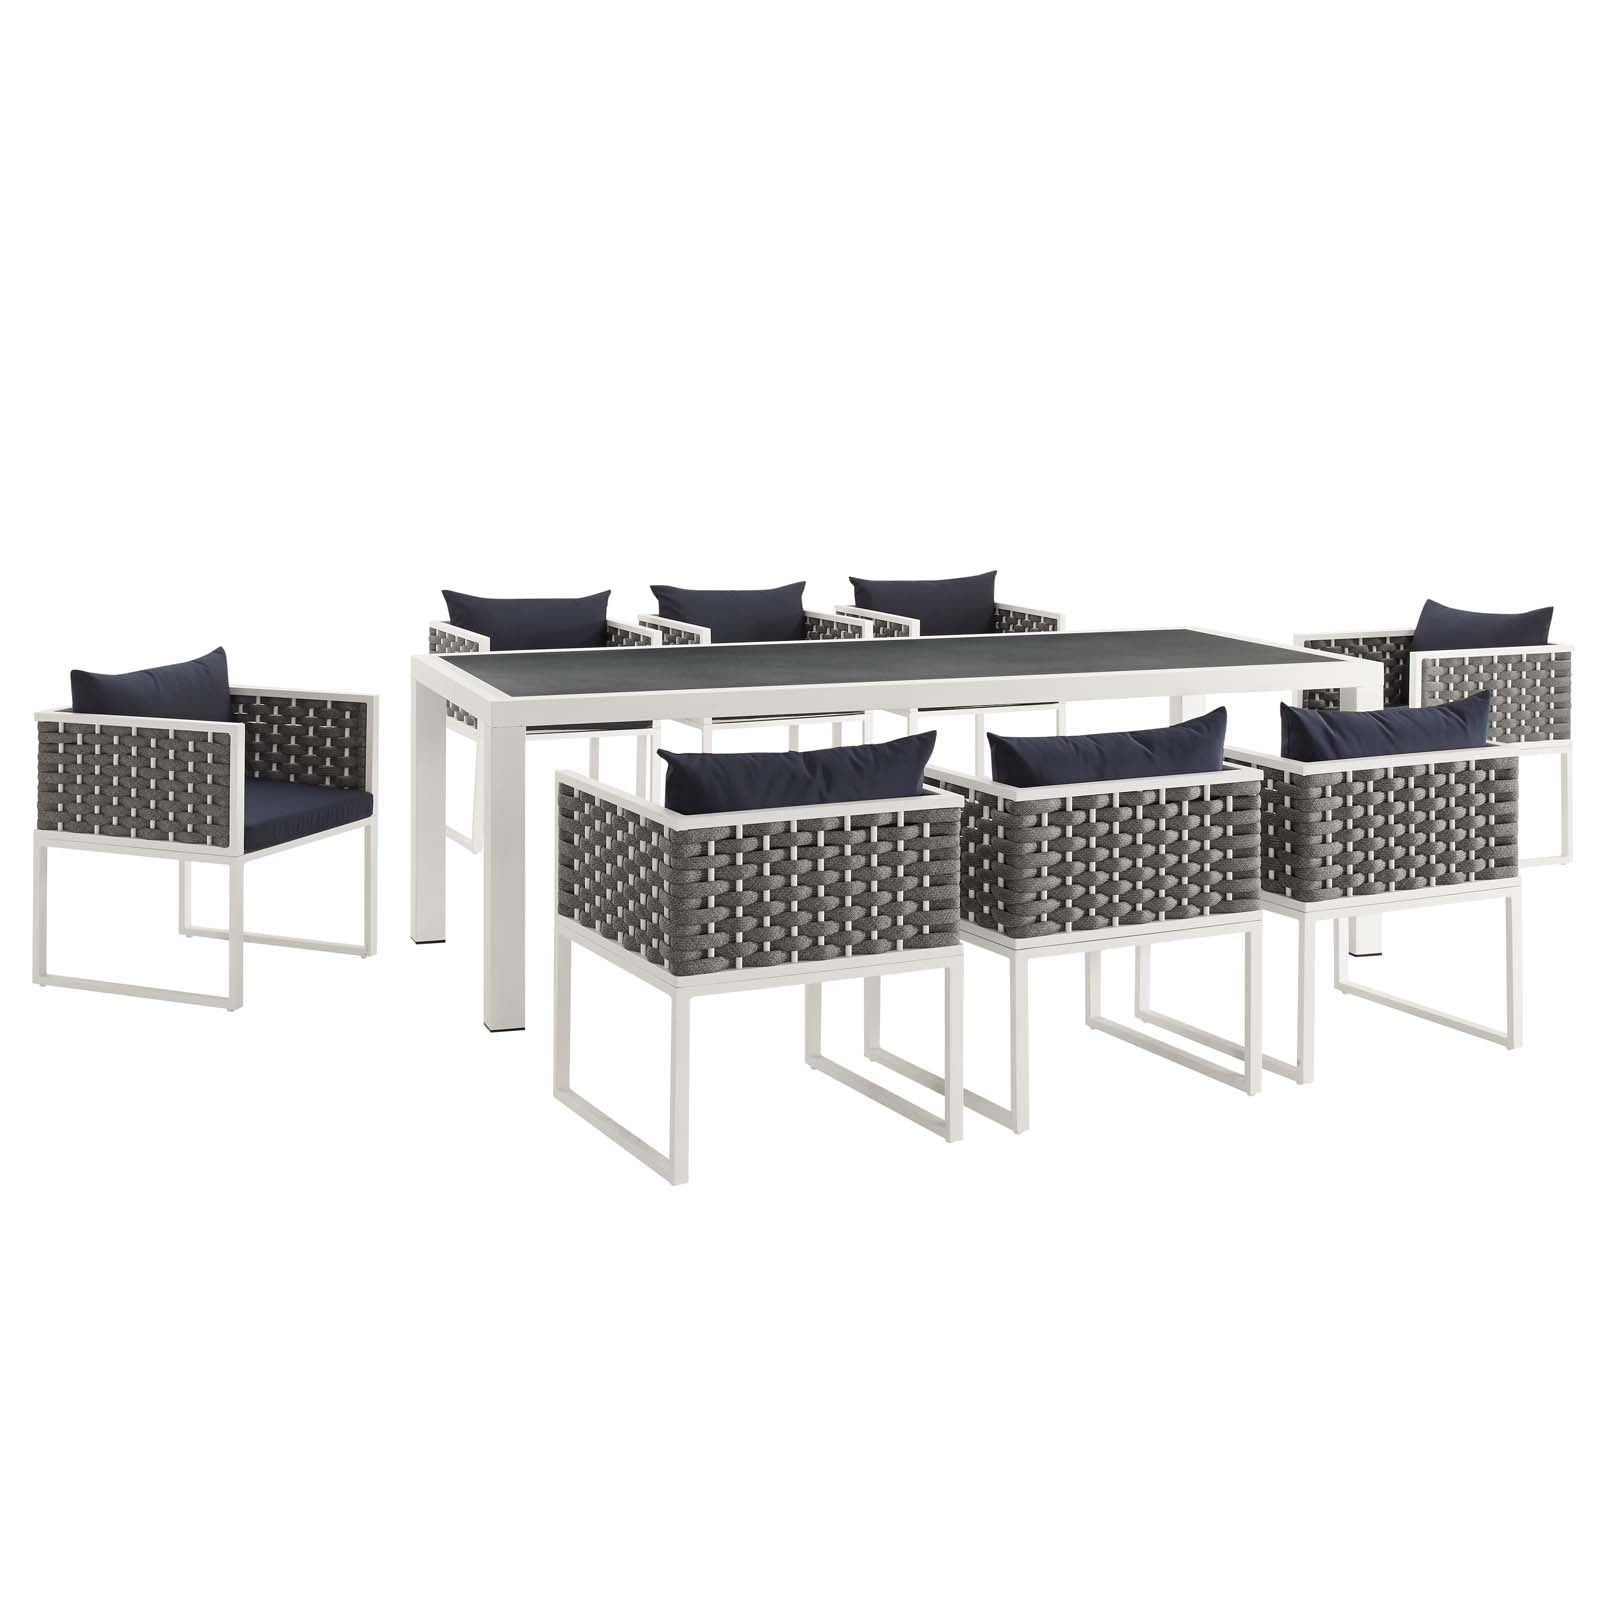 Stance 9 Piece Outdoor Patio Aluminum Dining Set - East Shore Modern Home Furnishings